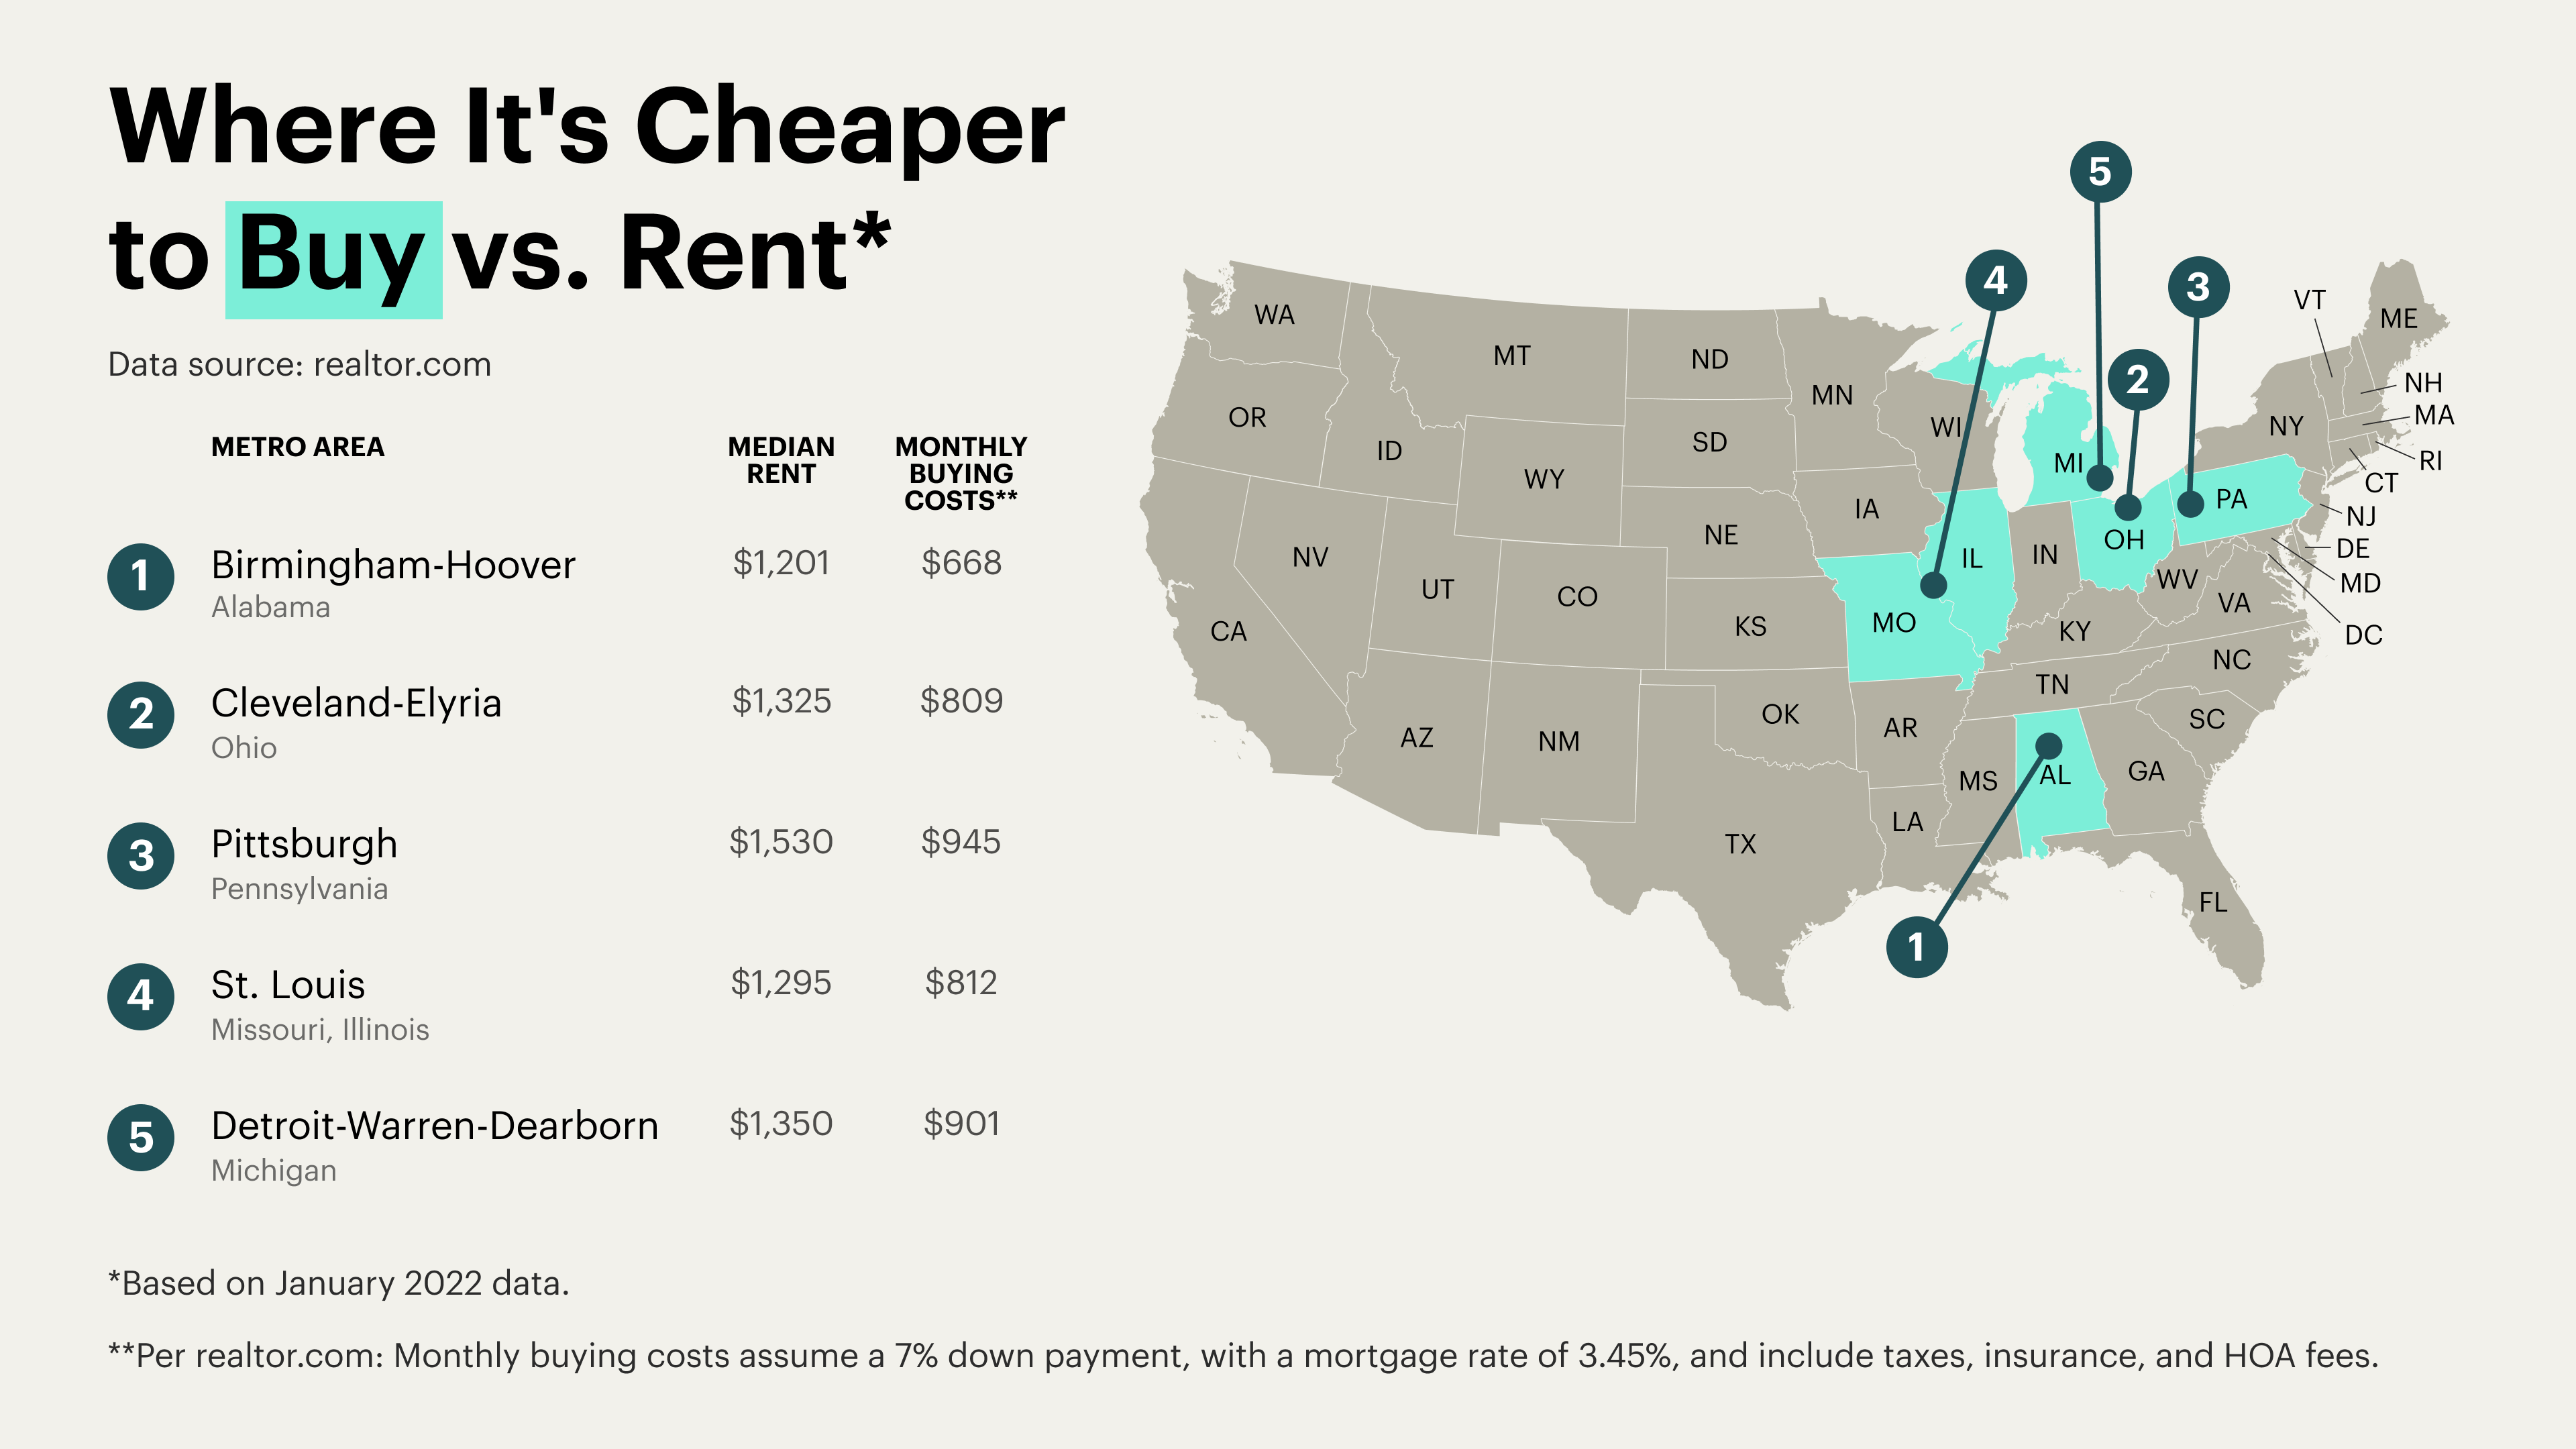 Where it's cheaper to buy versus rent a home